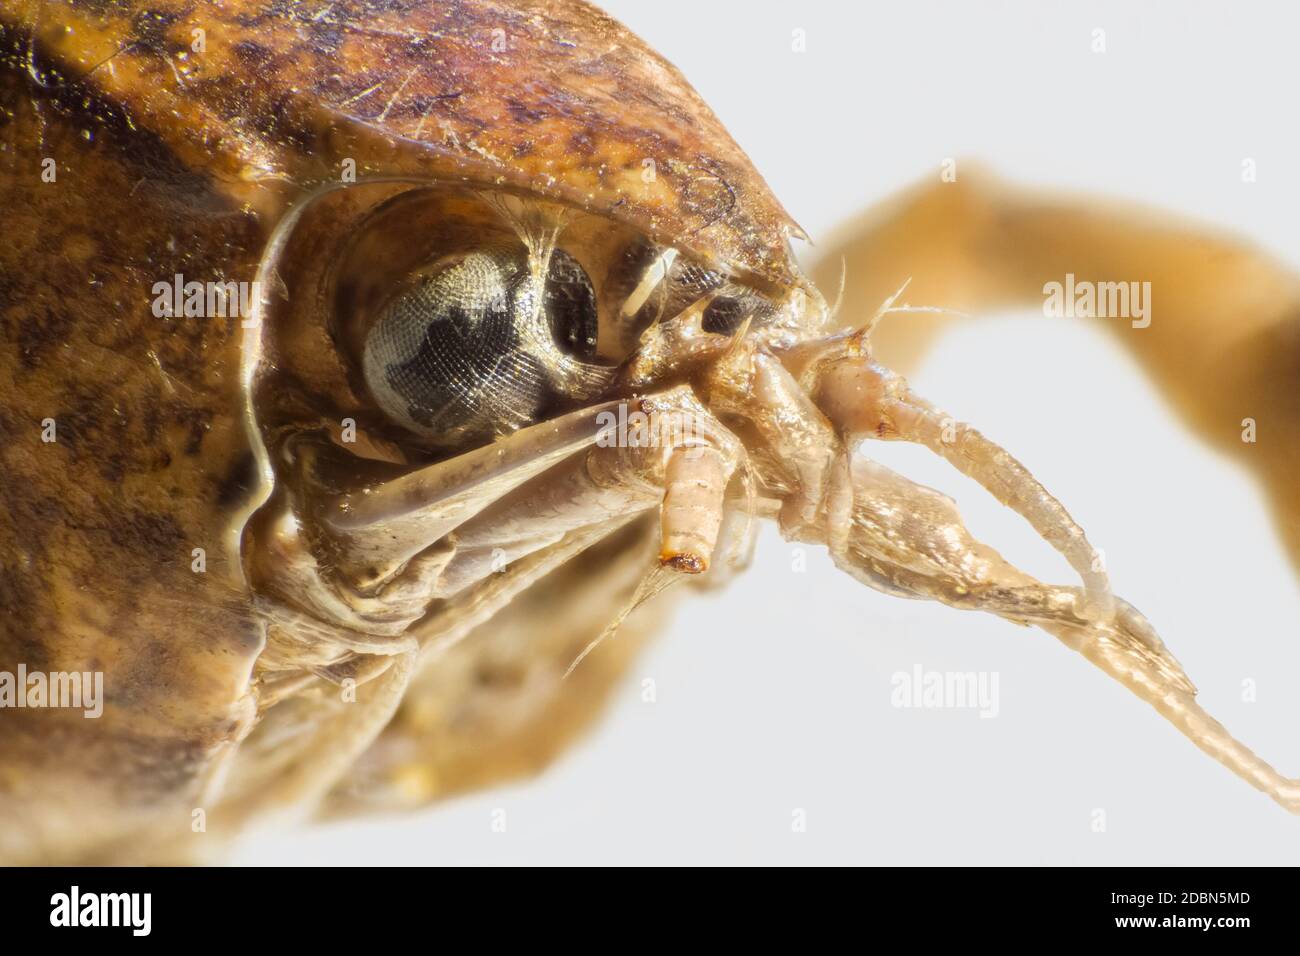 macro shot showing the head of a small crayfish Stock Photo